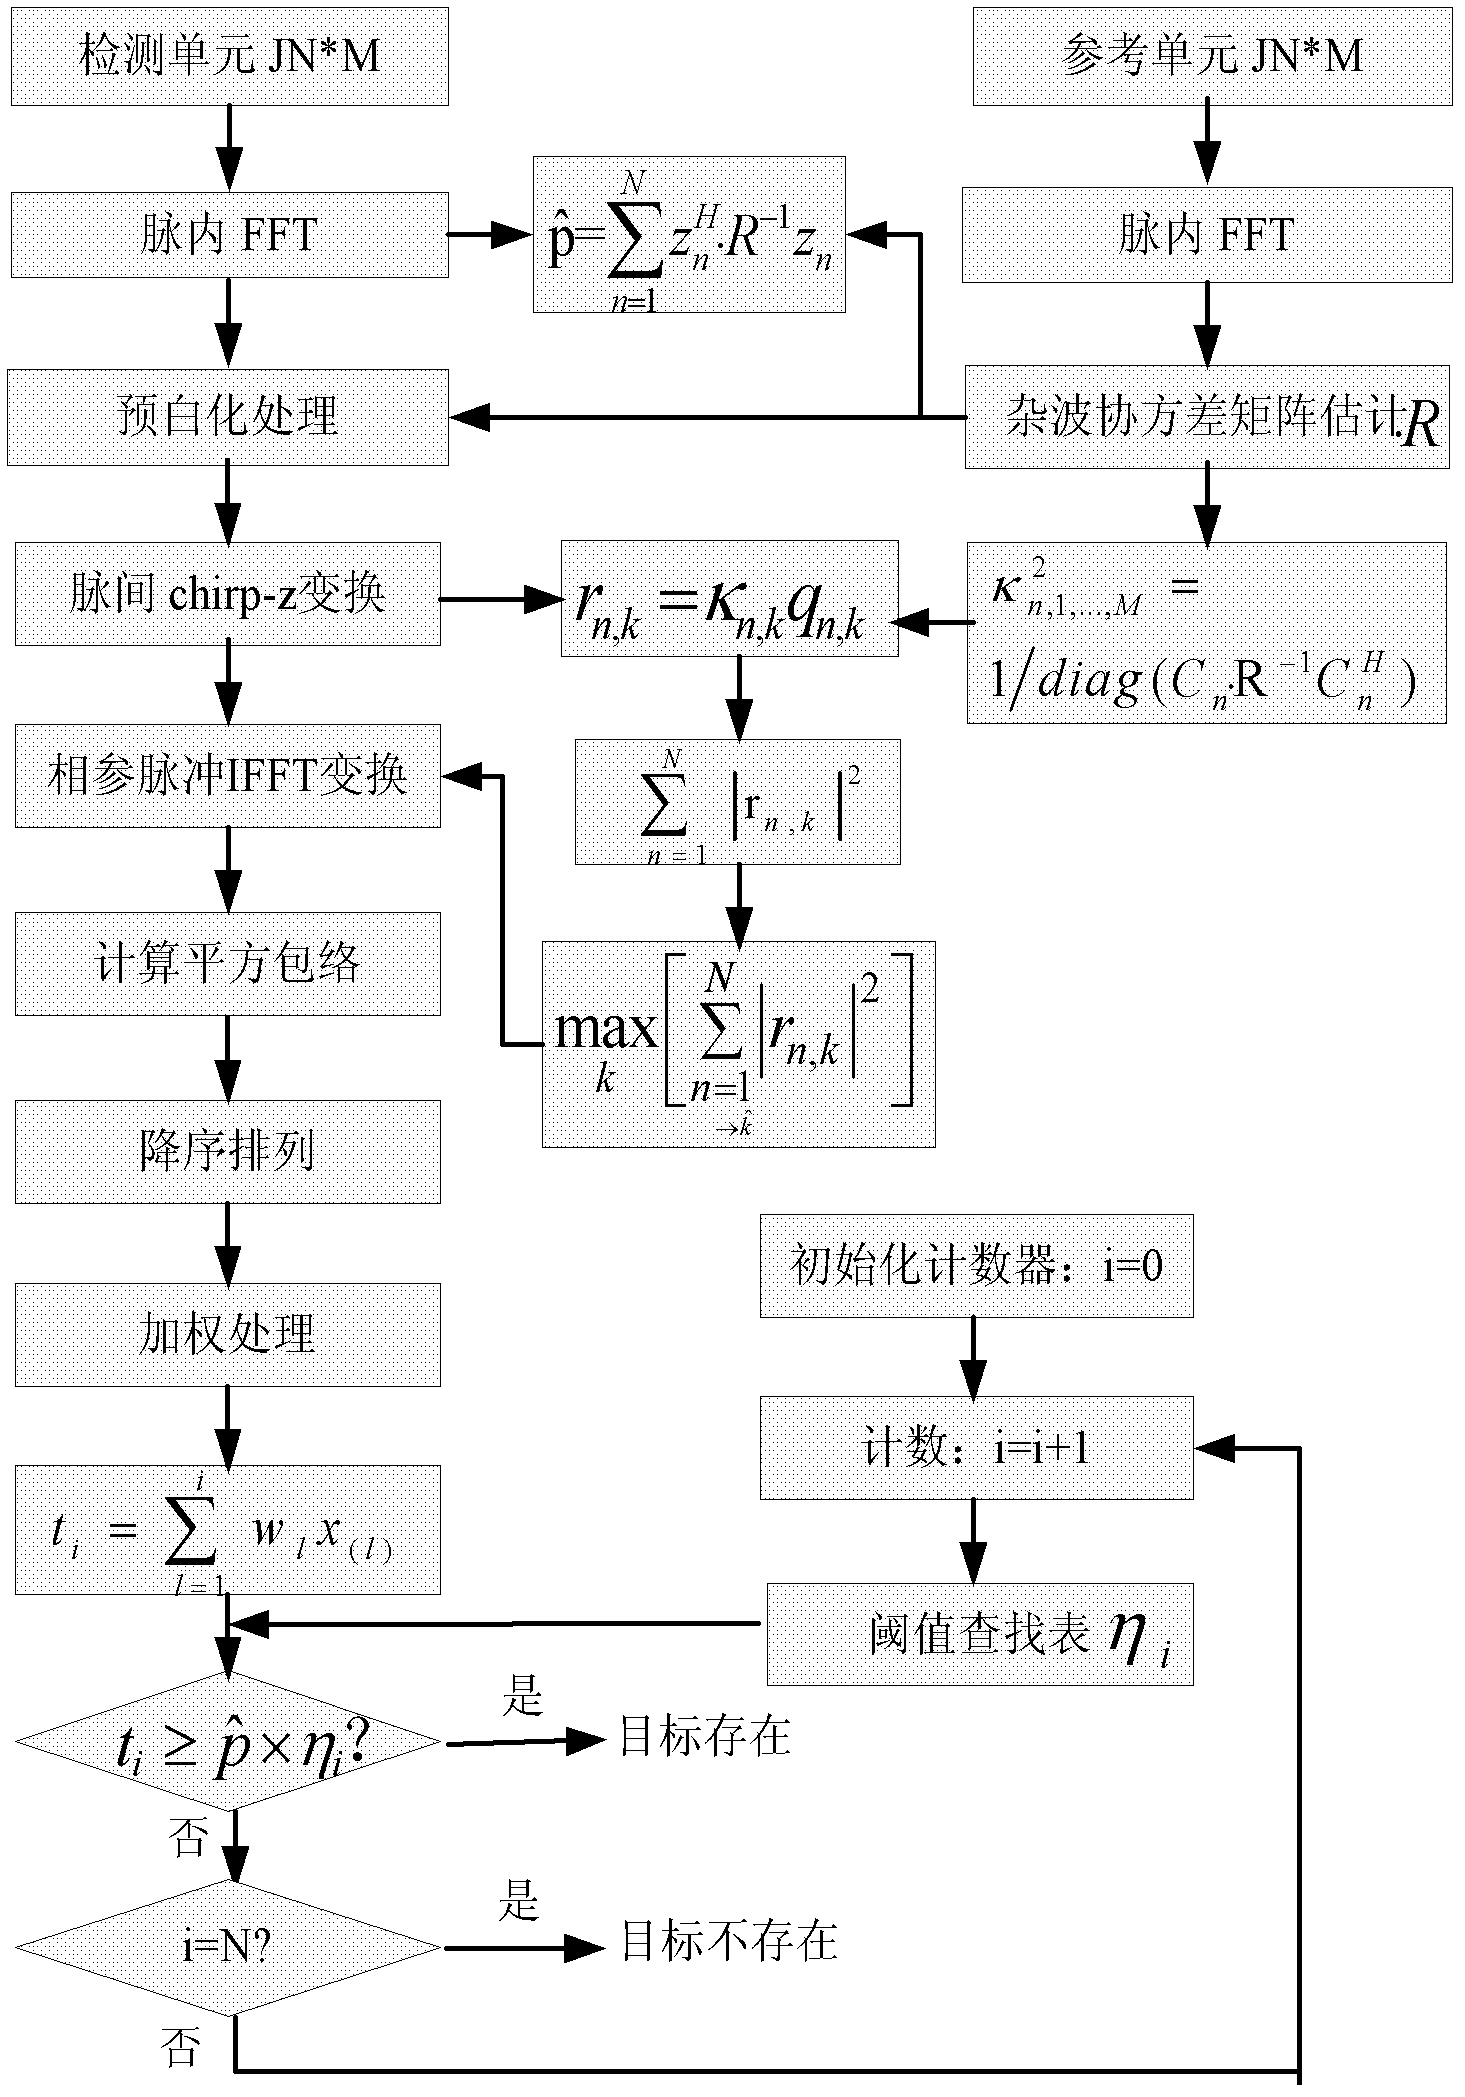 Broadband radar detection method based on weighted sequence statistics and multiple-pulse coherence accumulation